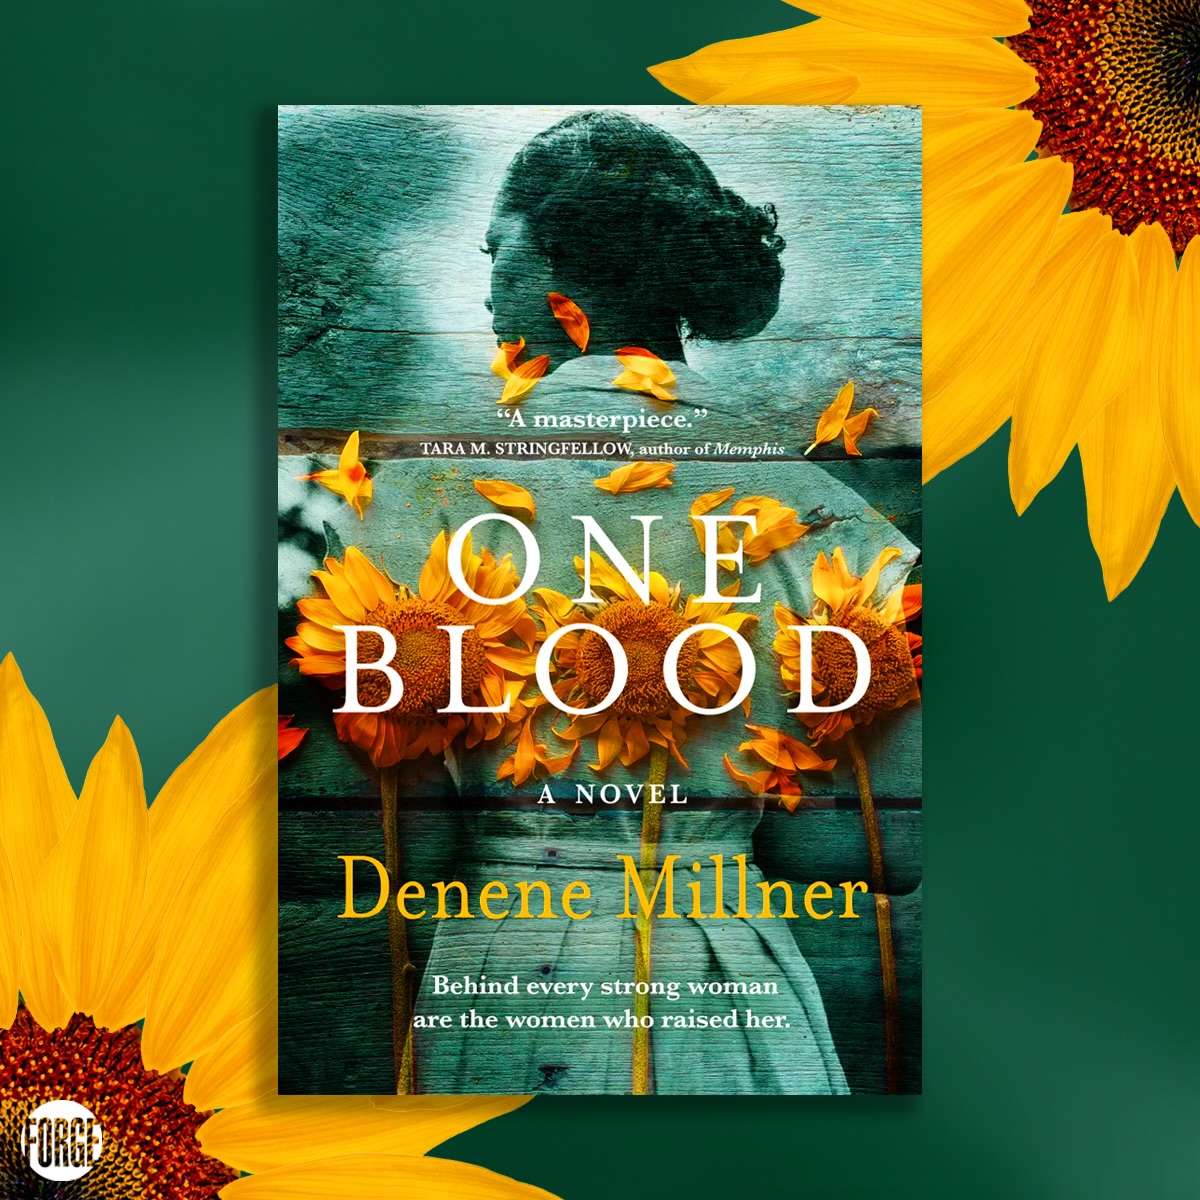 We're absolutely blown away by the gorgeous cover of the trade paperback edition of #OneBlood by @mybrownbaby! This intimate yet sweeping novel encompasses the poetic brilliance and power of Homegoing and The Mothers. Coming 11.12.24 Art credit: Claire Ward